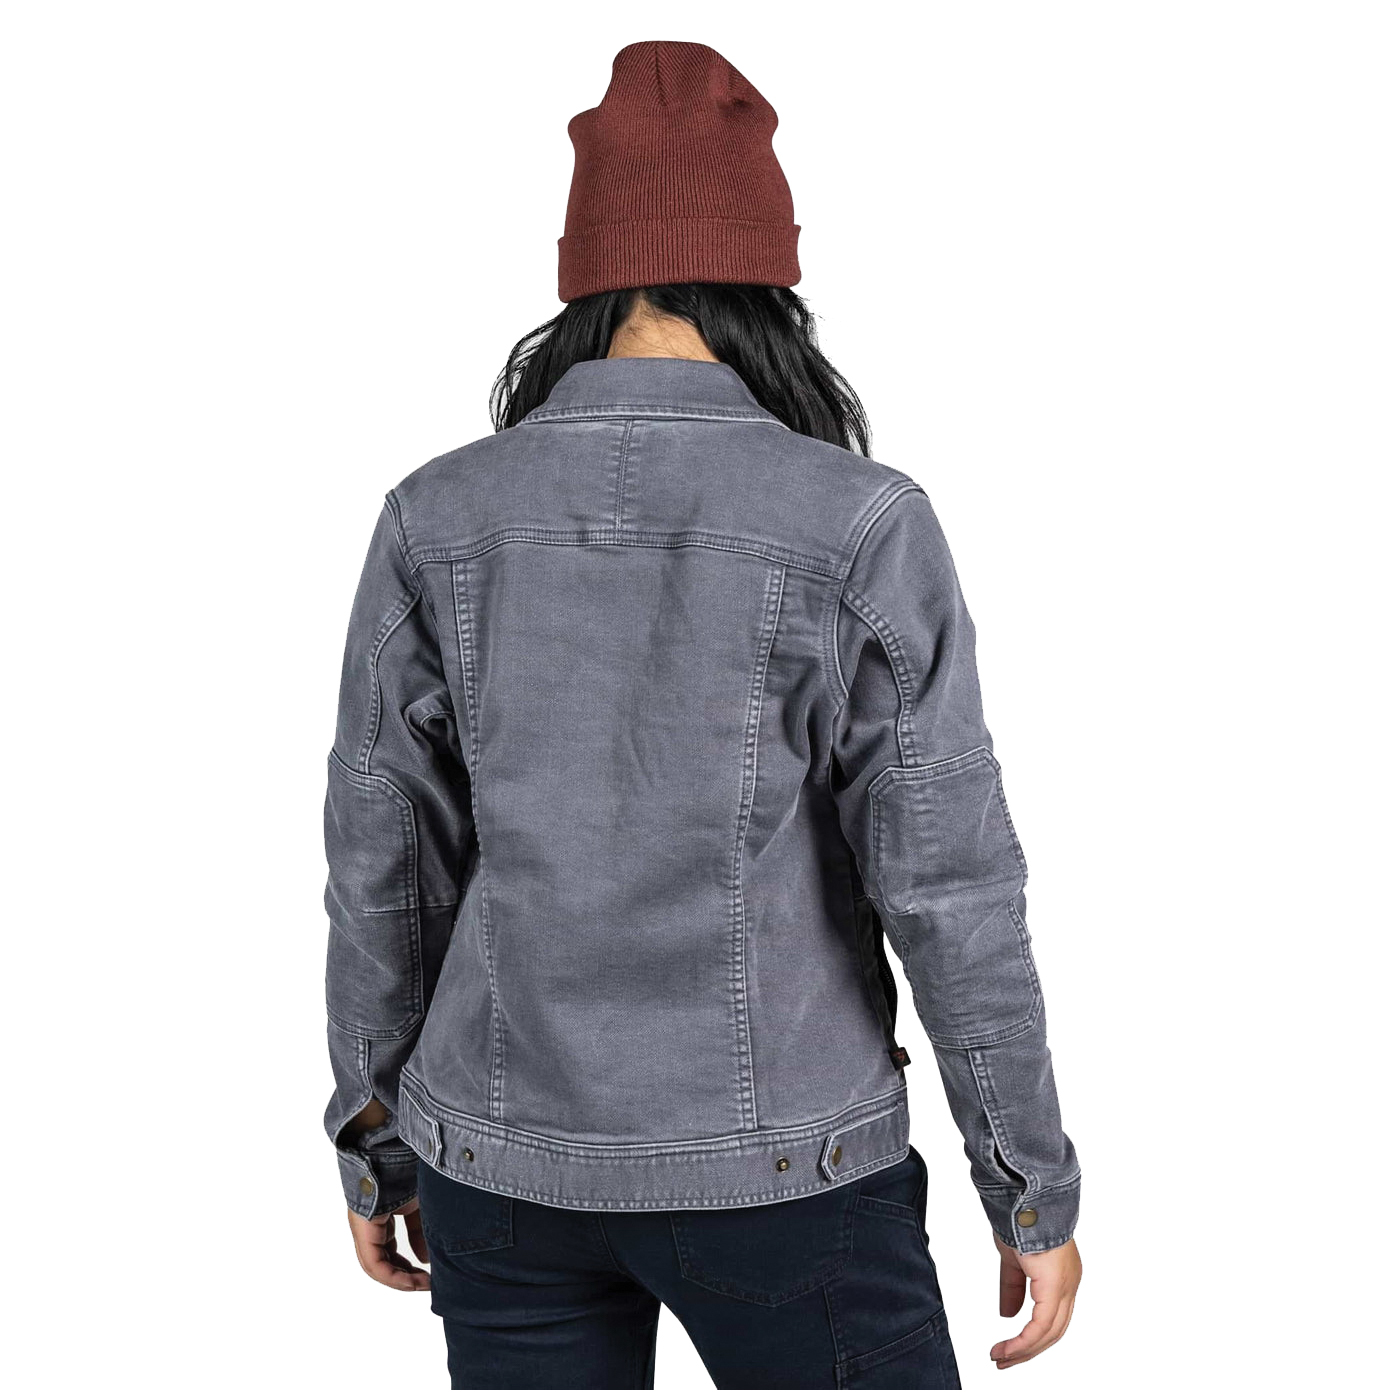 Dovetail Workwear DWF22OW9-030-L Thermal Trucker Jacket, L, Cotton/Polyester/Spandex, Gray, Snap - 5